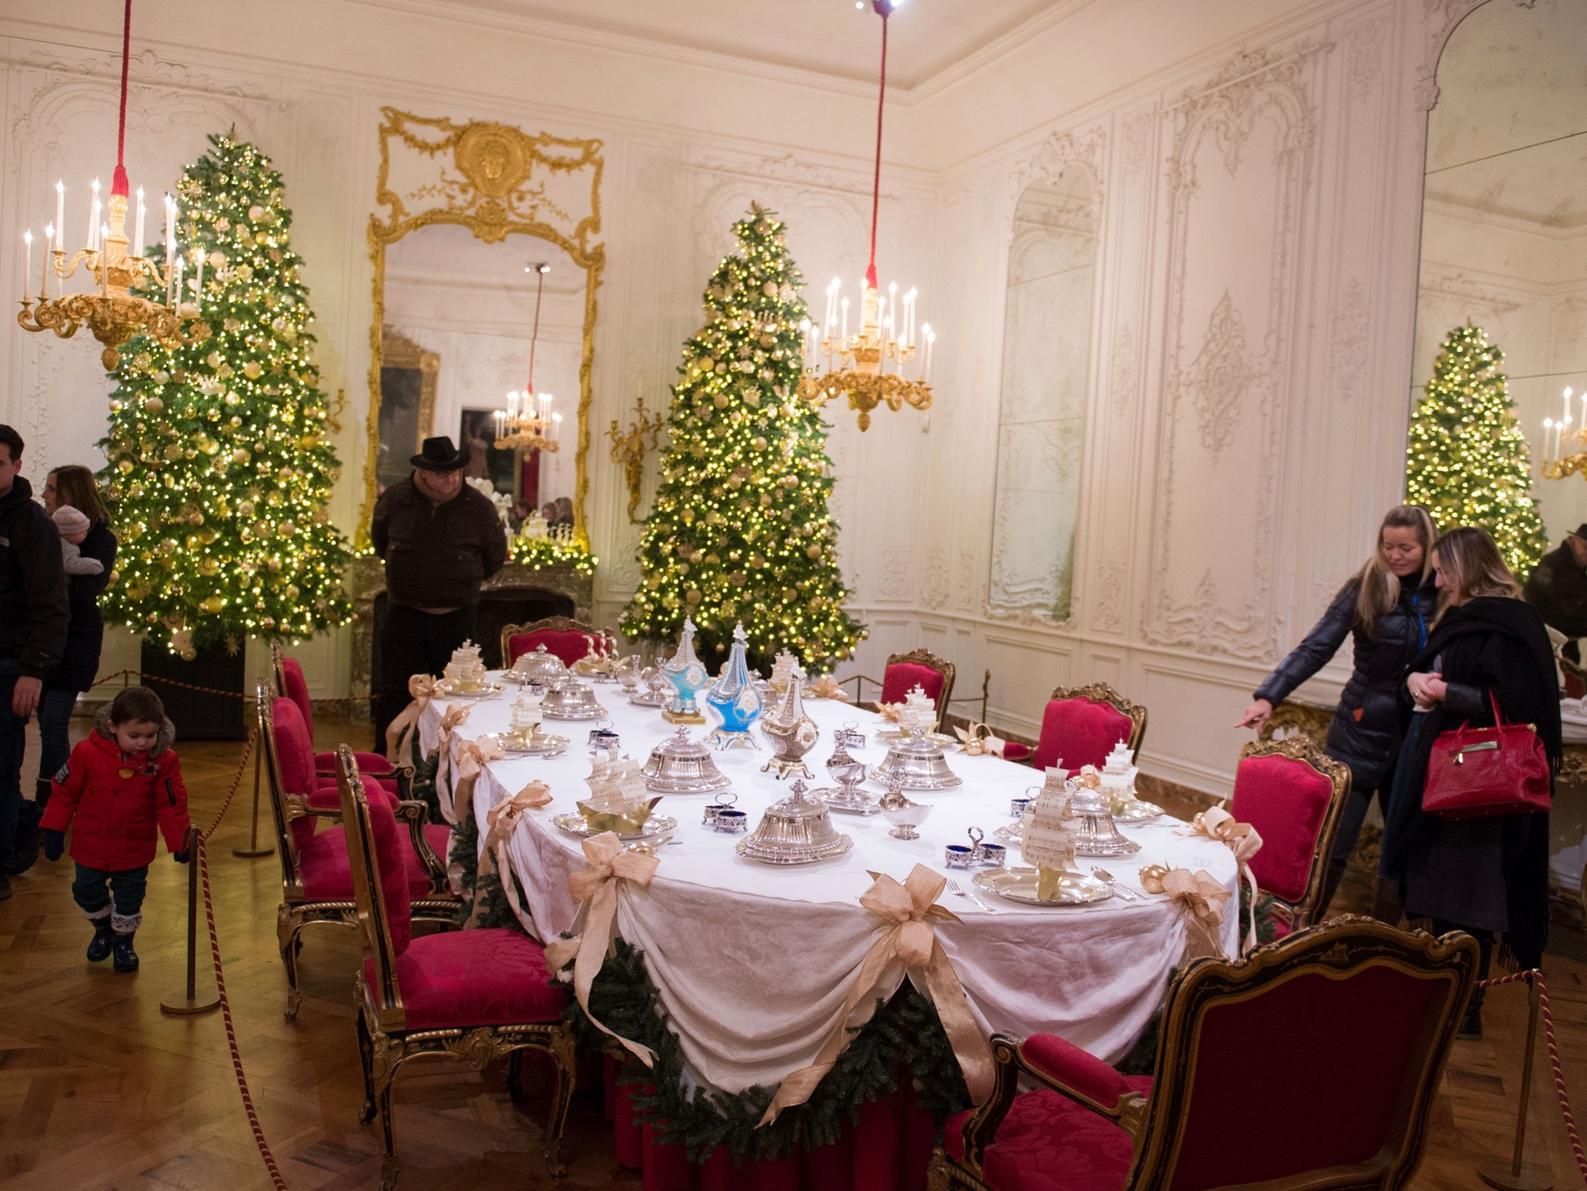 A grand dining room inside the manor